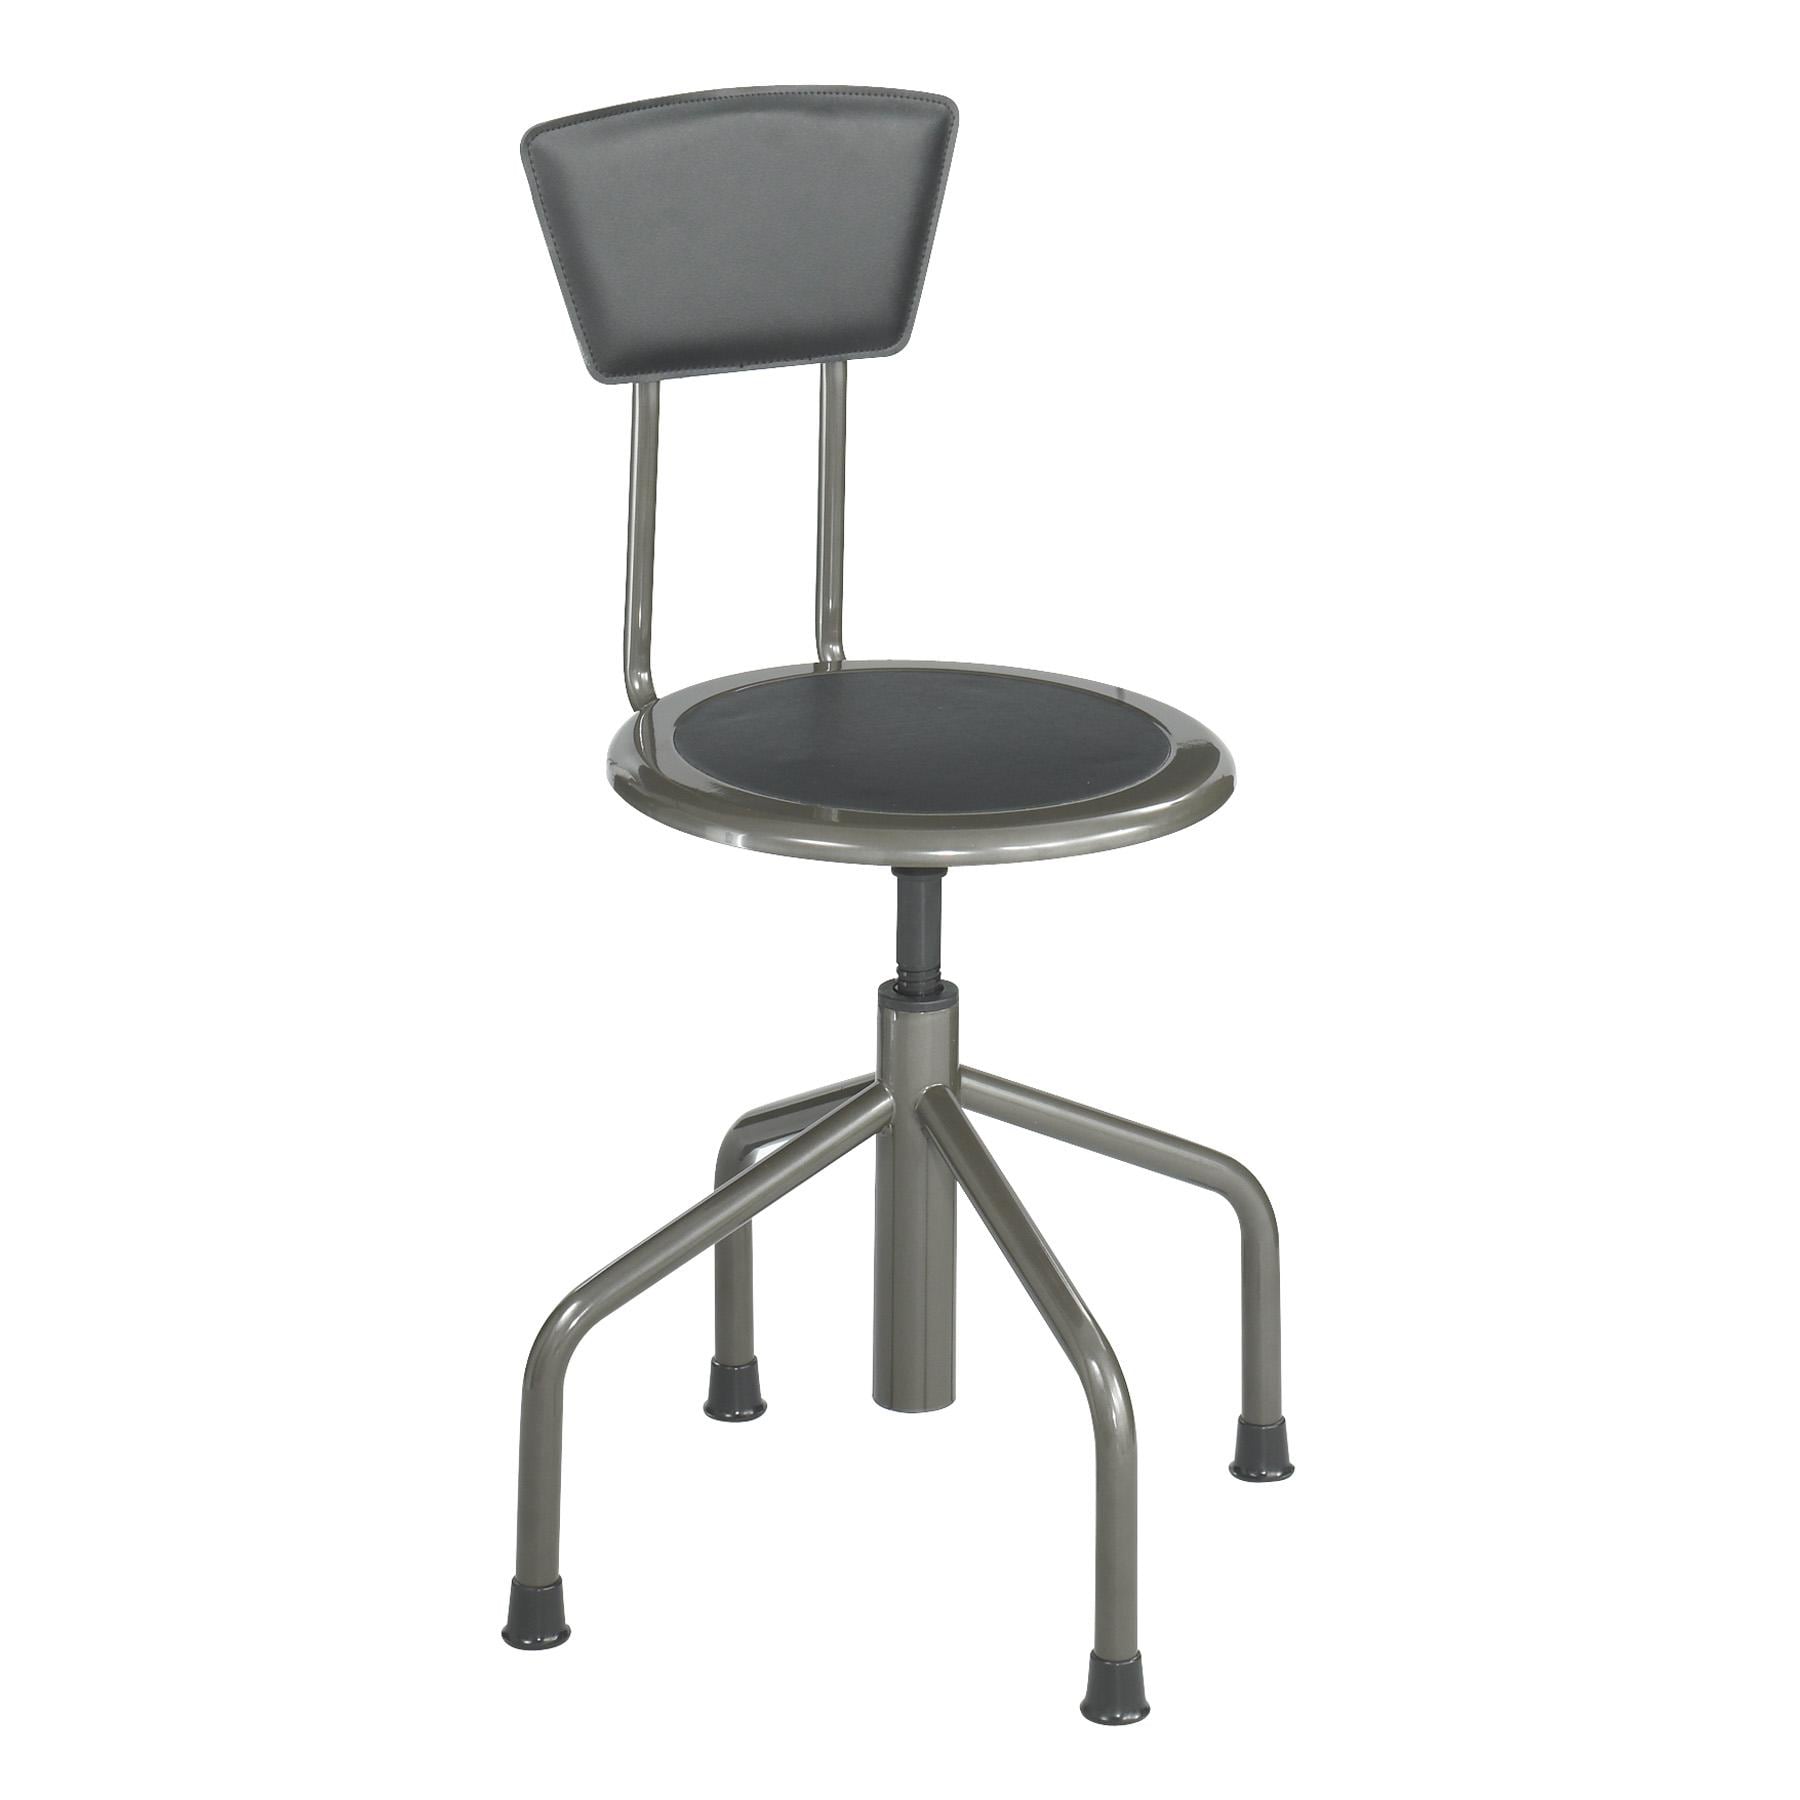 Safco Diesel Low Base Stool   12580912   Shopping   The Best